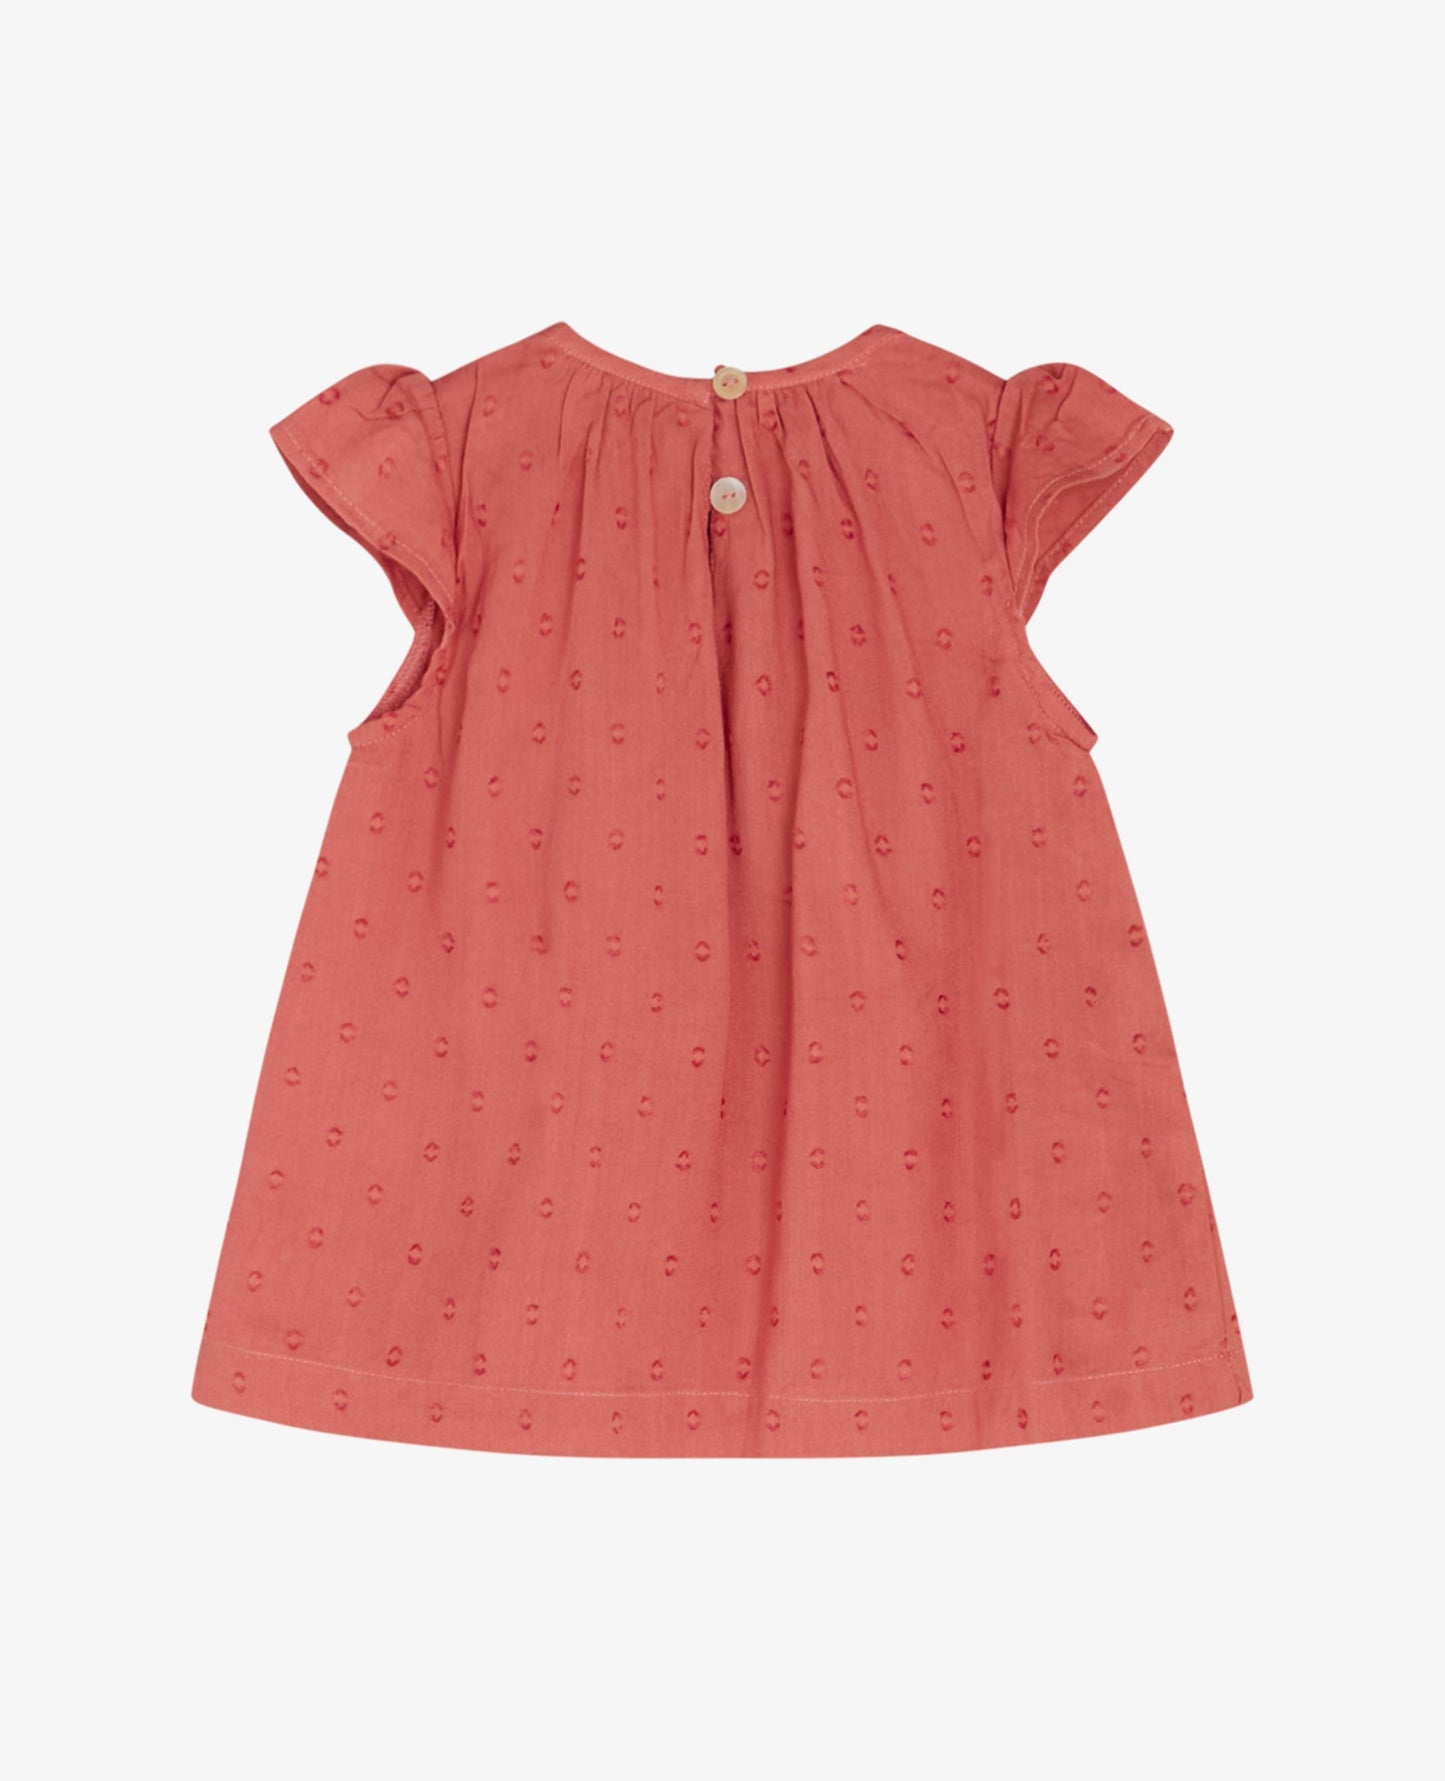 BABY STRUCTURED DOT DRESS